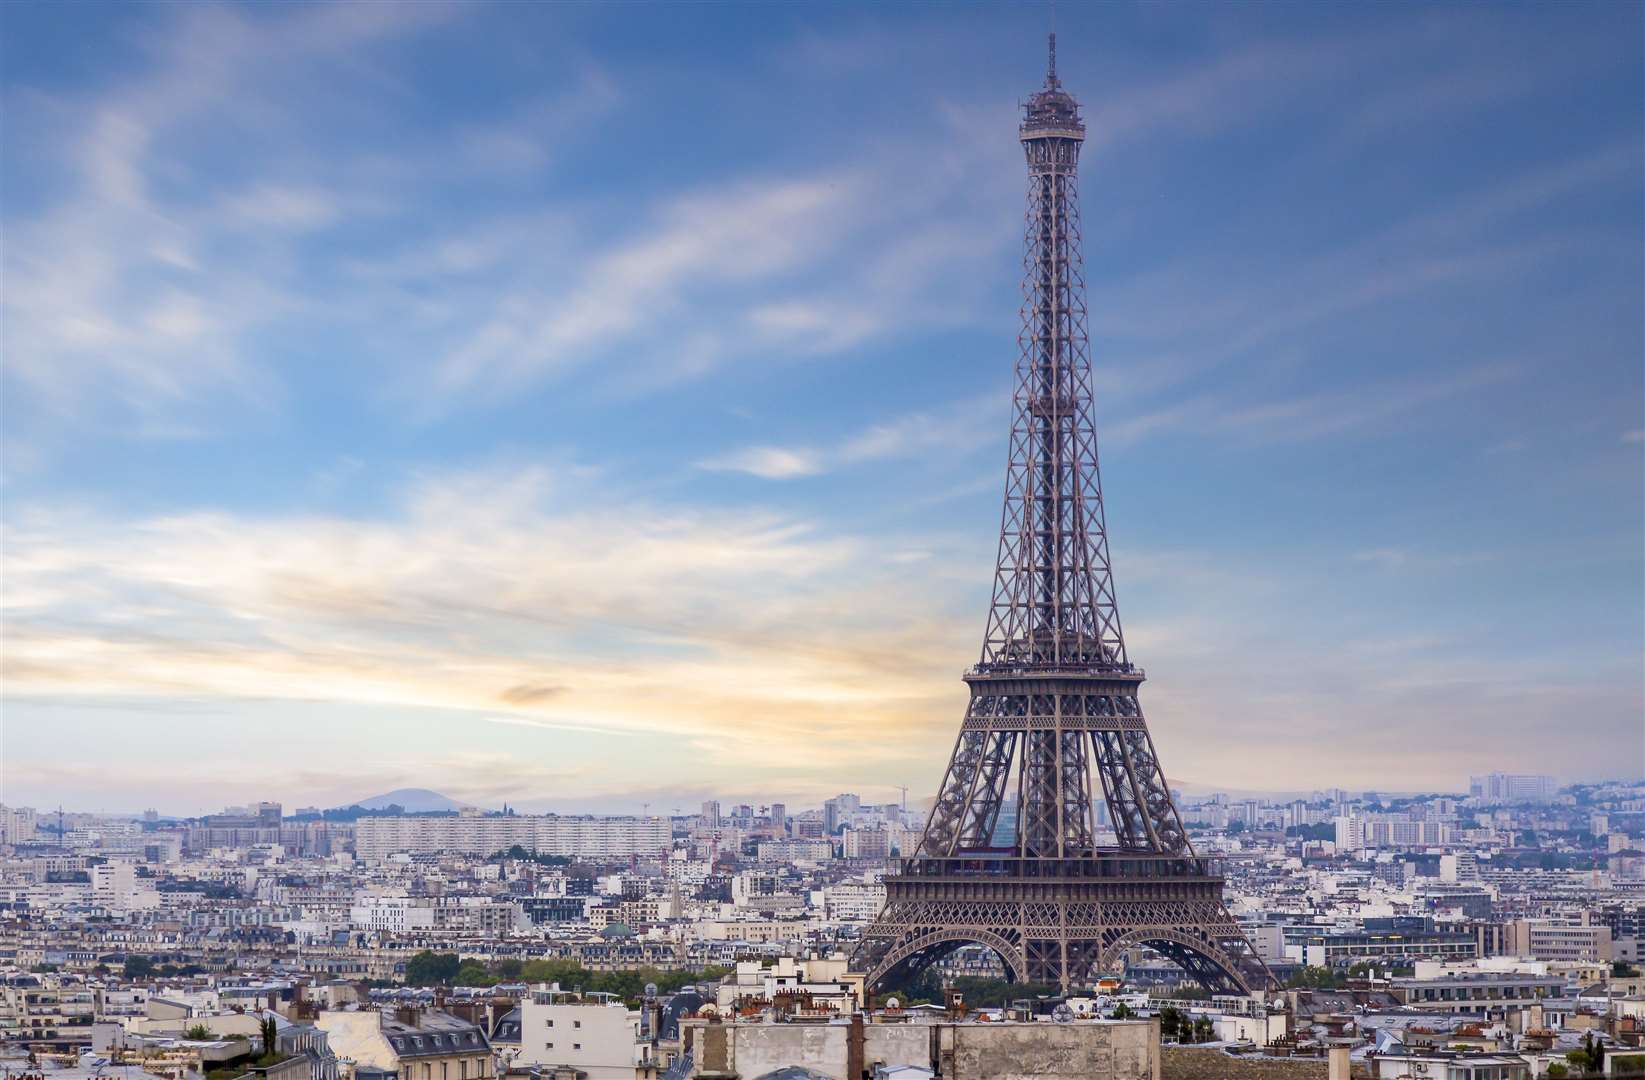 British tourists may soon be able to visit the Eiffel Tower again Picture: BWA_IMAGES